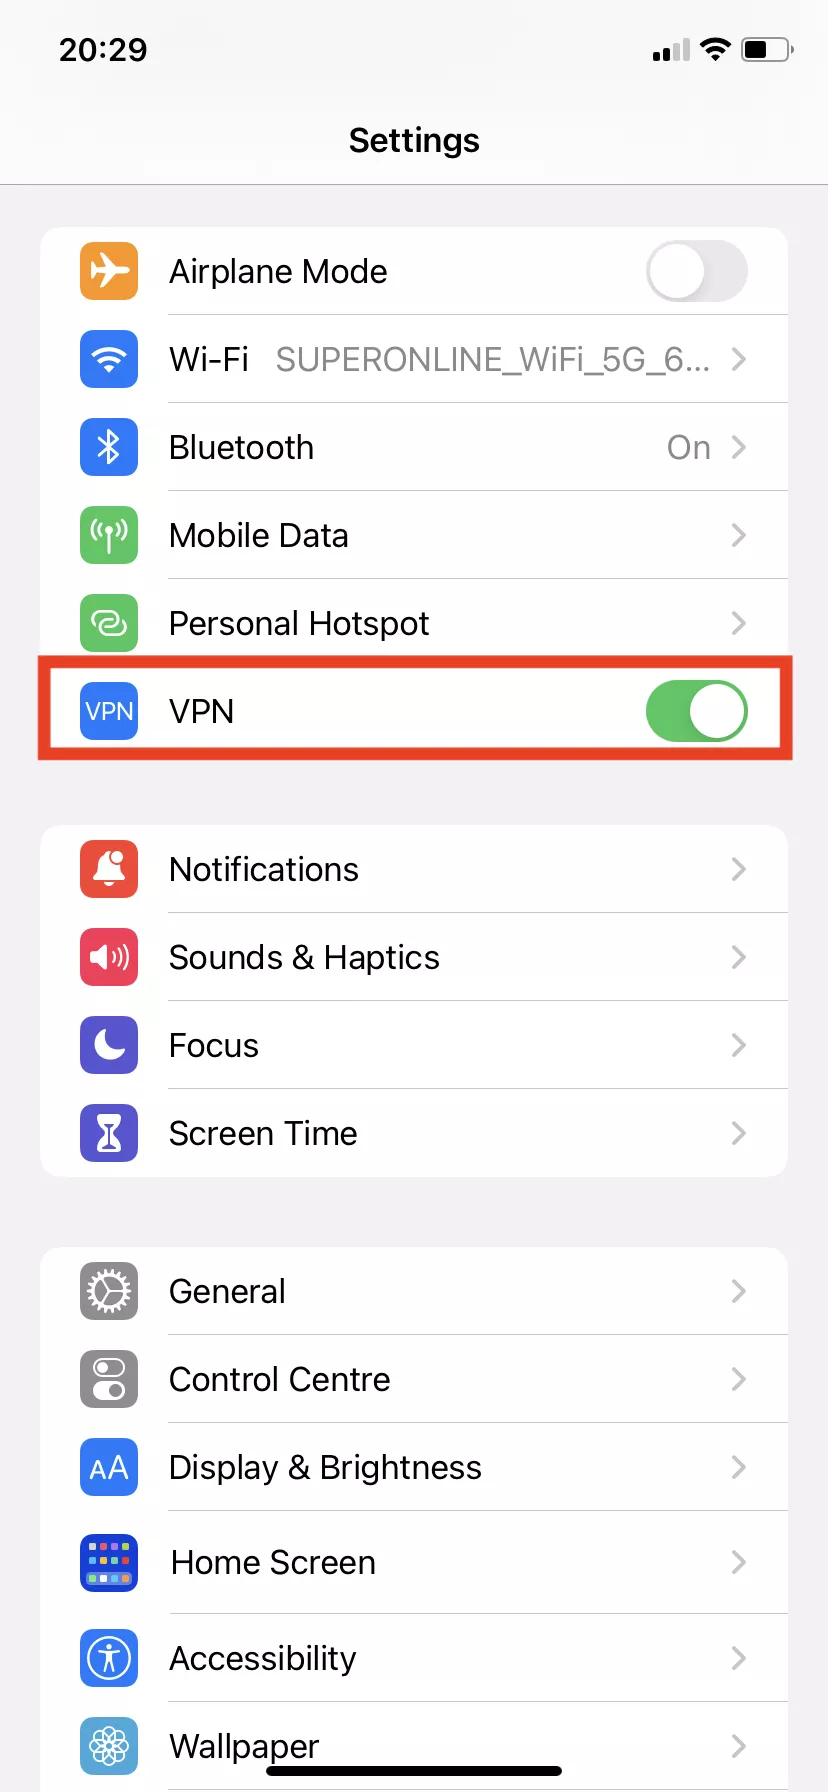 Can you change VPN on iPhone?